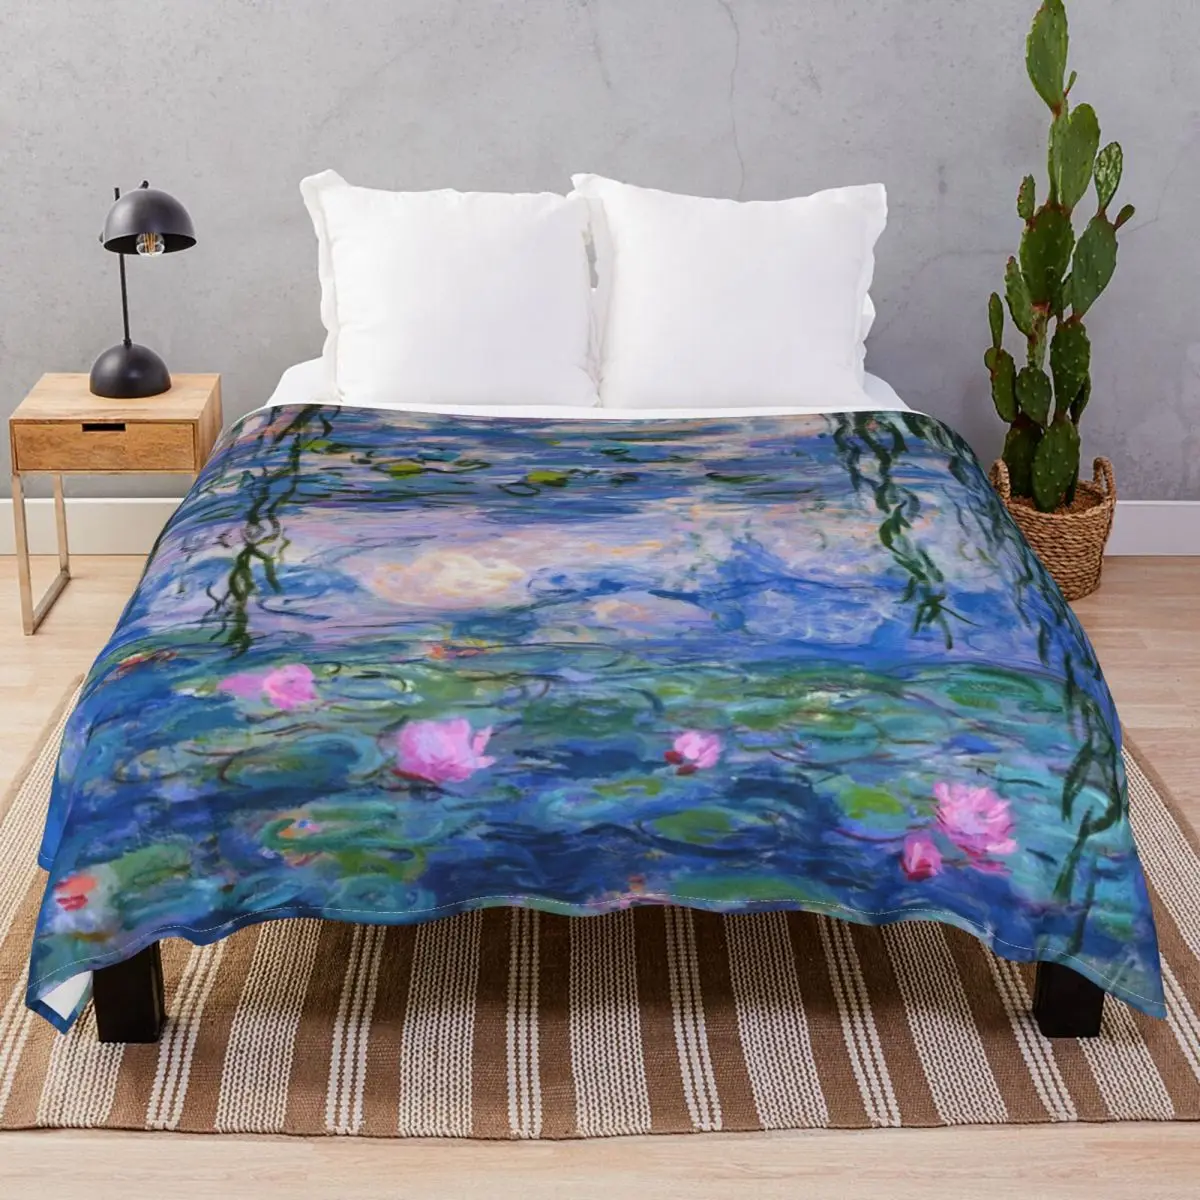 Water Lilies Monet Blanket Flannel Plush Decoration Ultra-Soft Unisex Throw Blankets for Bed Home Couch Travel Office